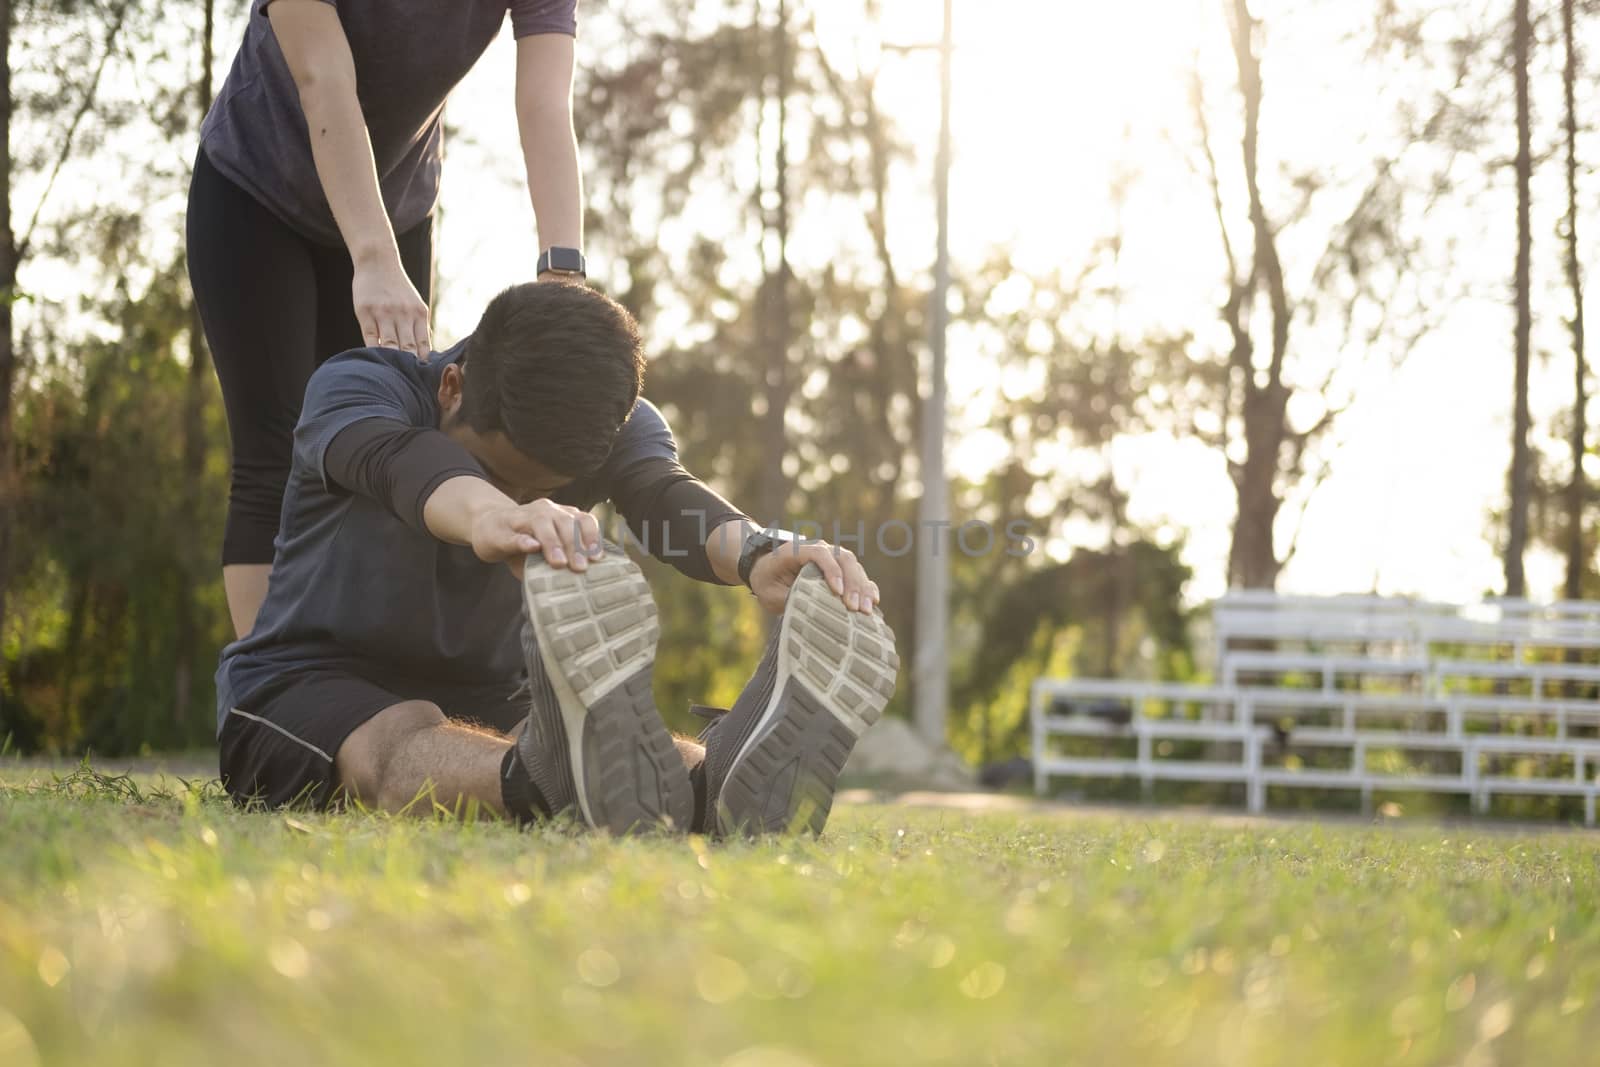 Young man and woman stretching in the park. Young couple cool down after workout exercise.